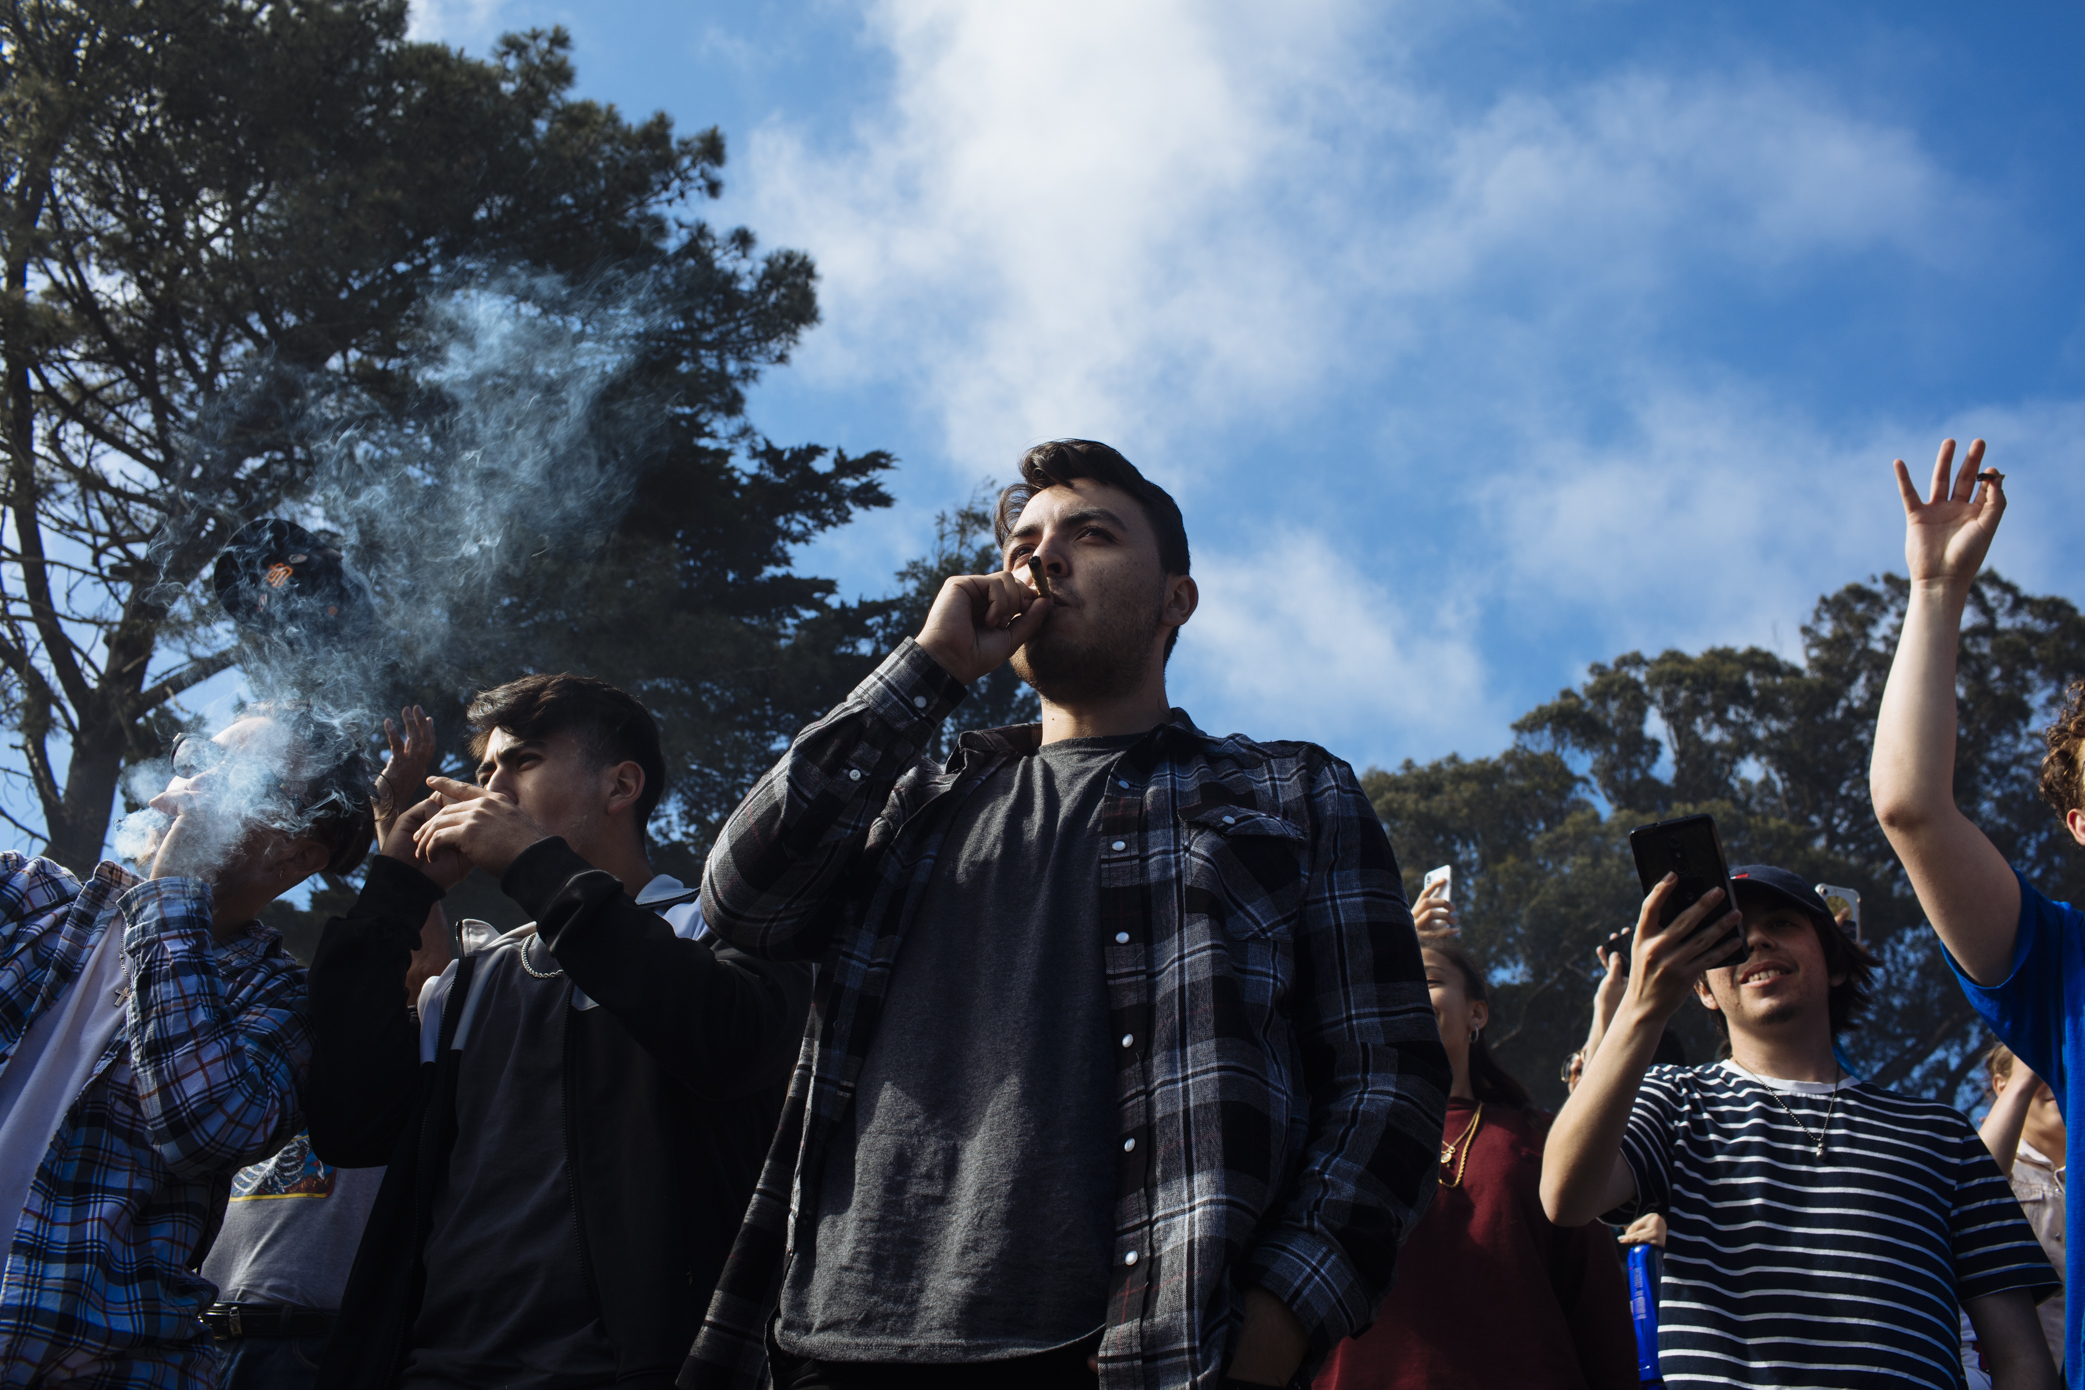 Who Started 420? This Is Where 420 Began And The Story Behind It (Photos)